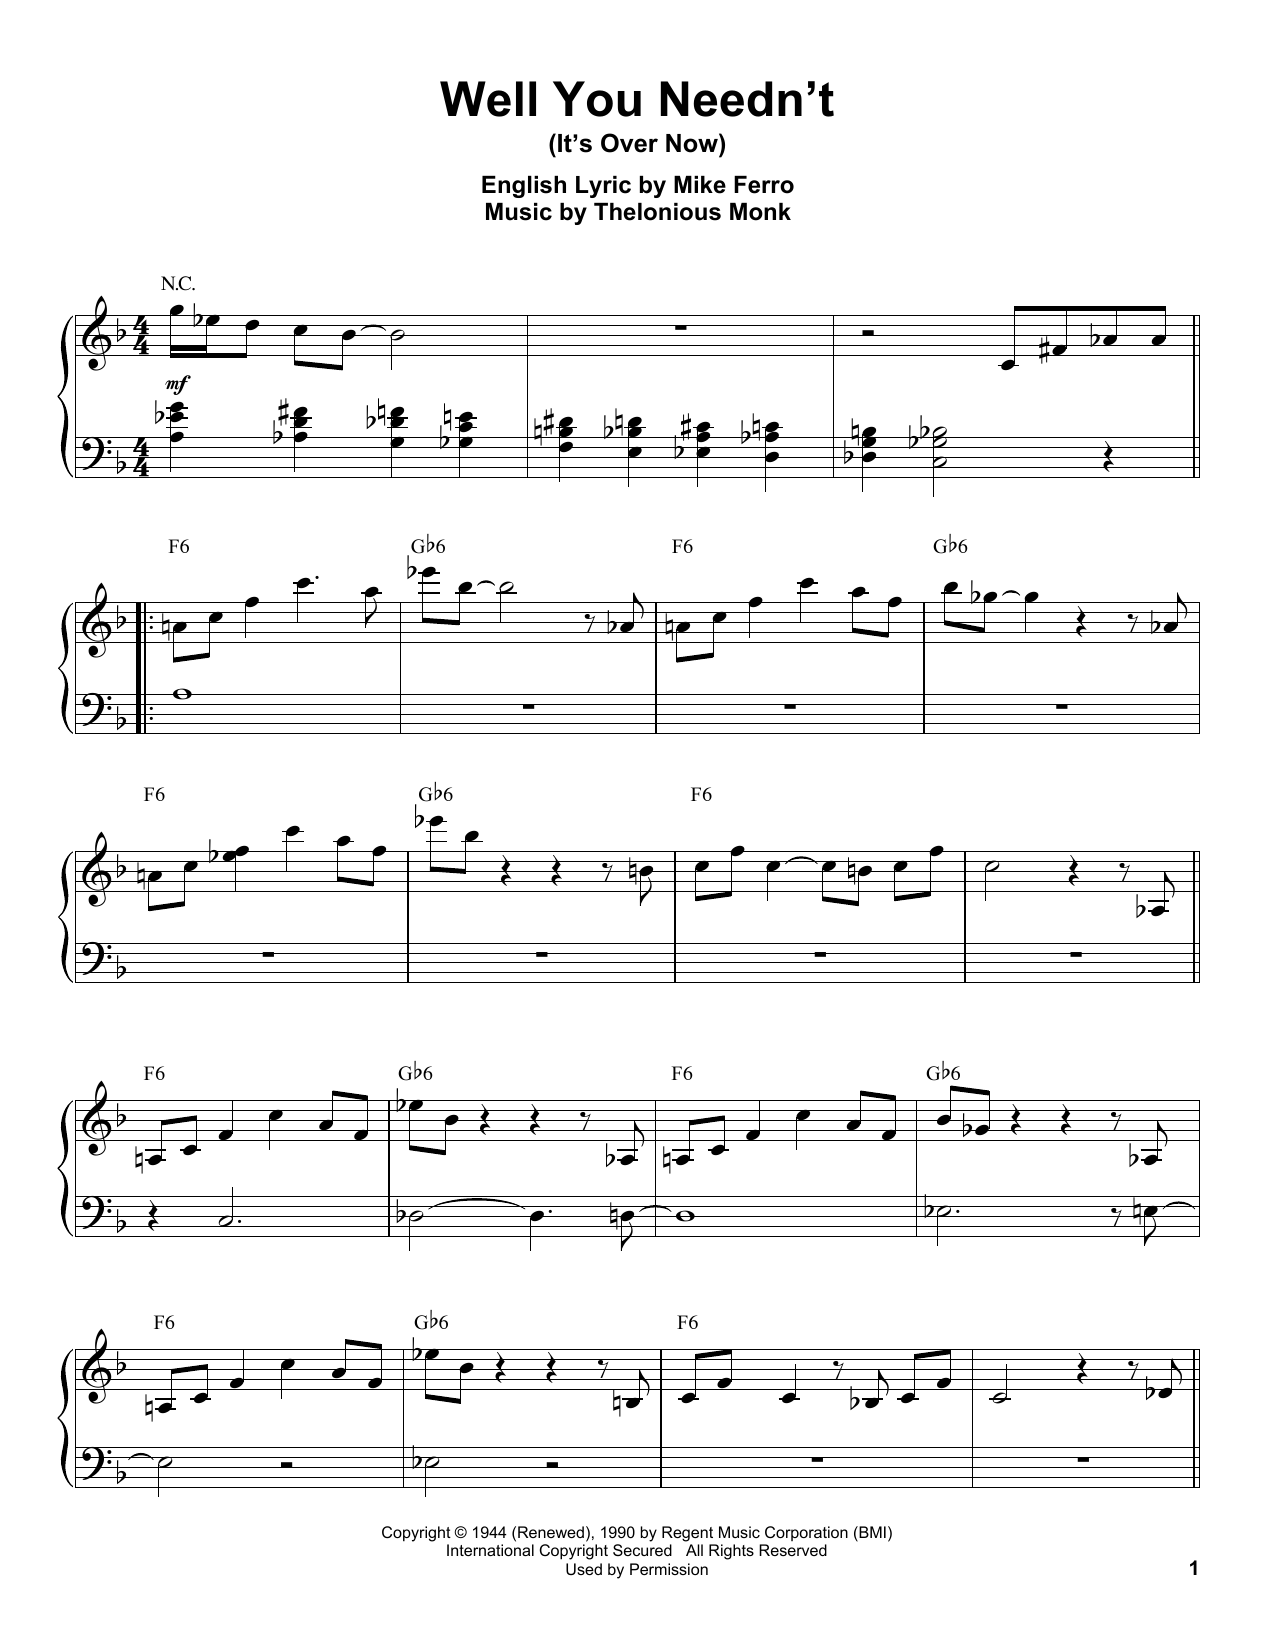 Download Thelonious Monk Well You Needn't (It's Over Now) Sheet Music